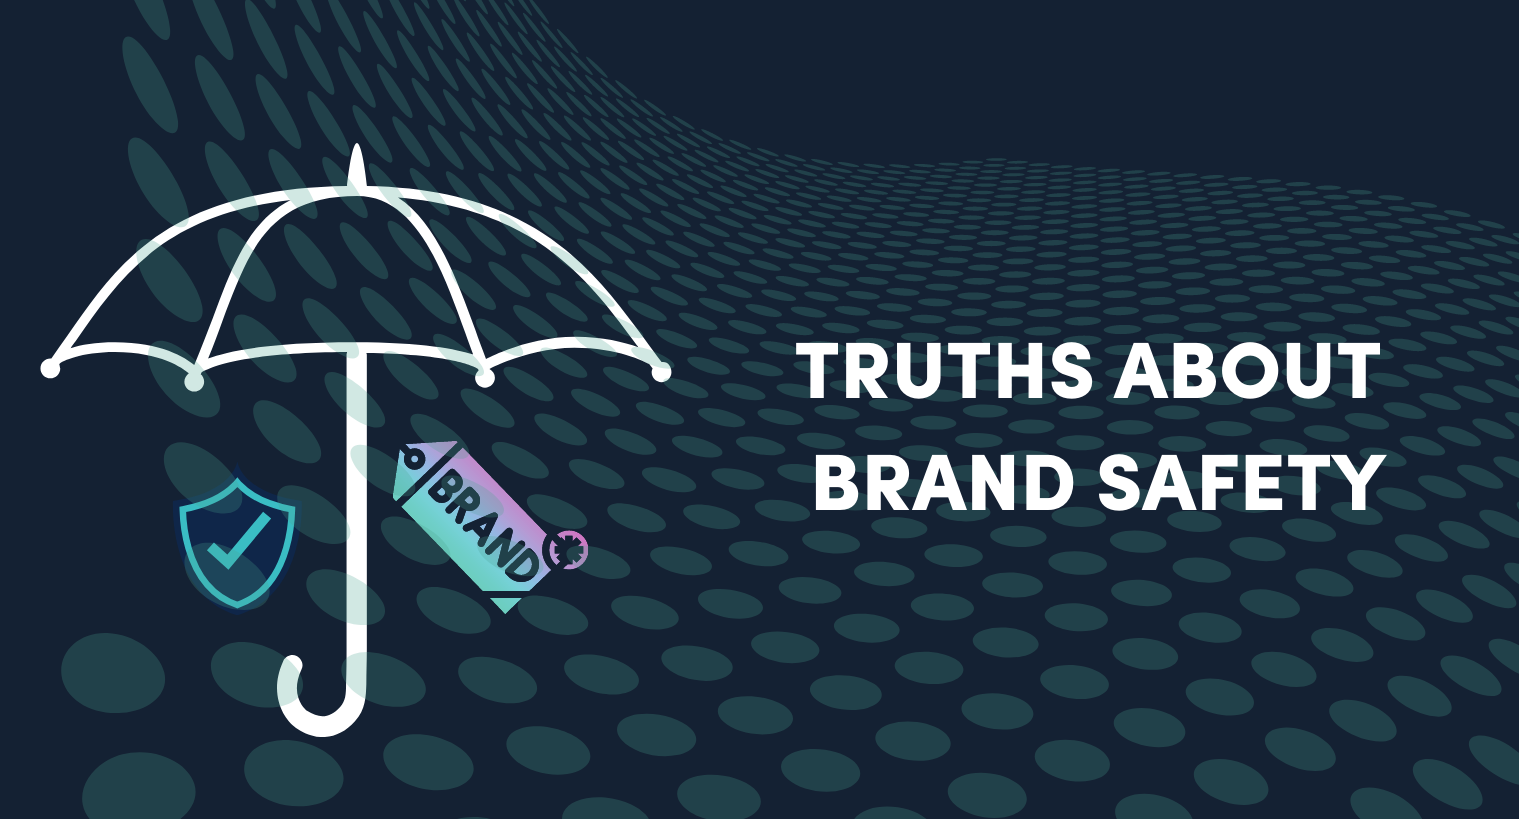 Truths about brand safety